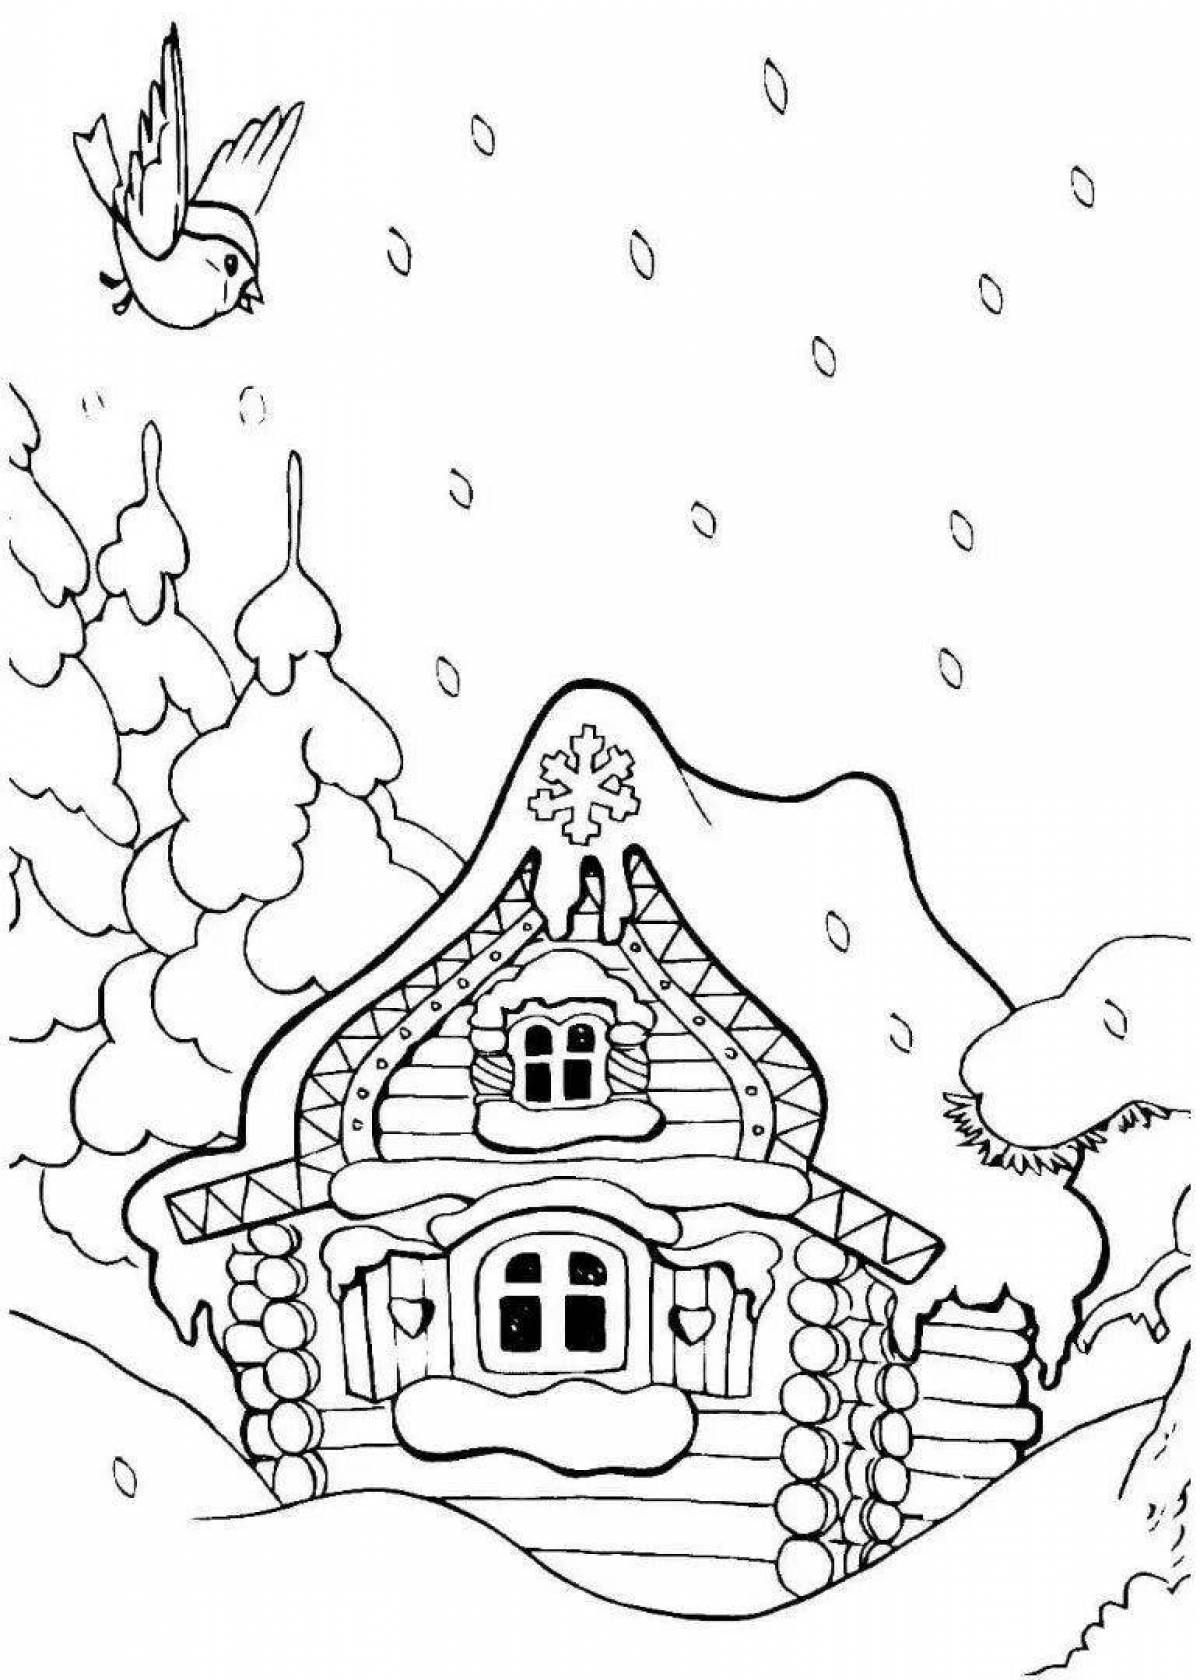 Charming fairy hut coloring book